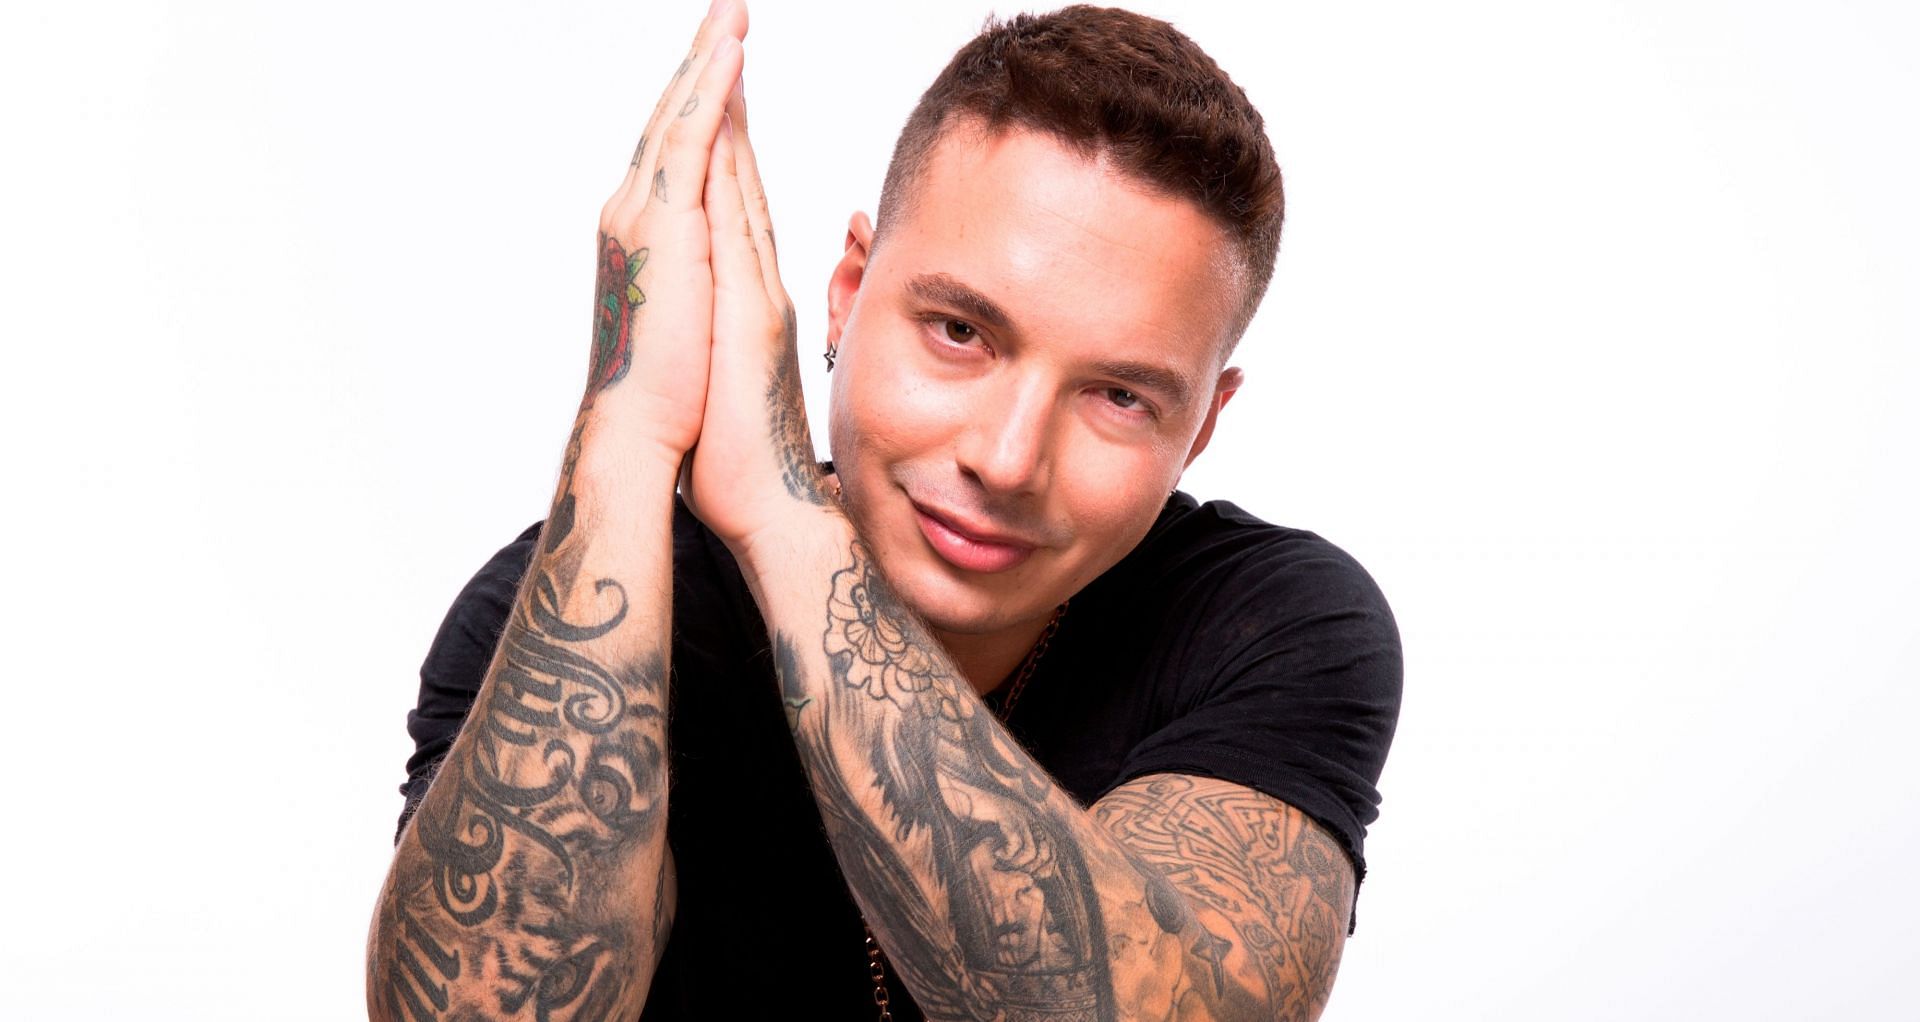 Prince of Reggaeton J Balvin makes a statement on the cover of L